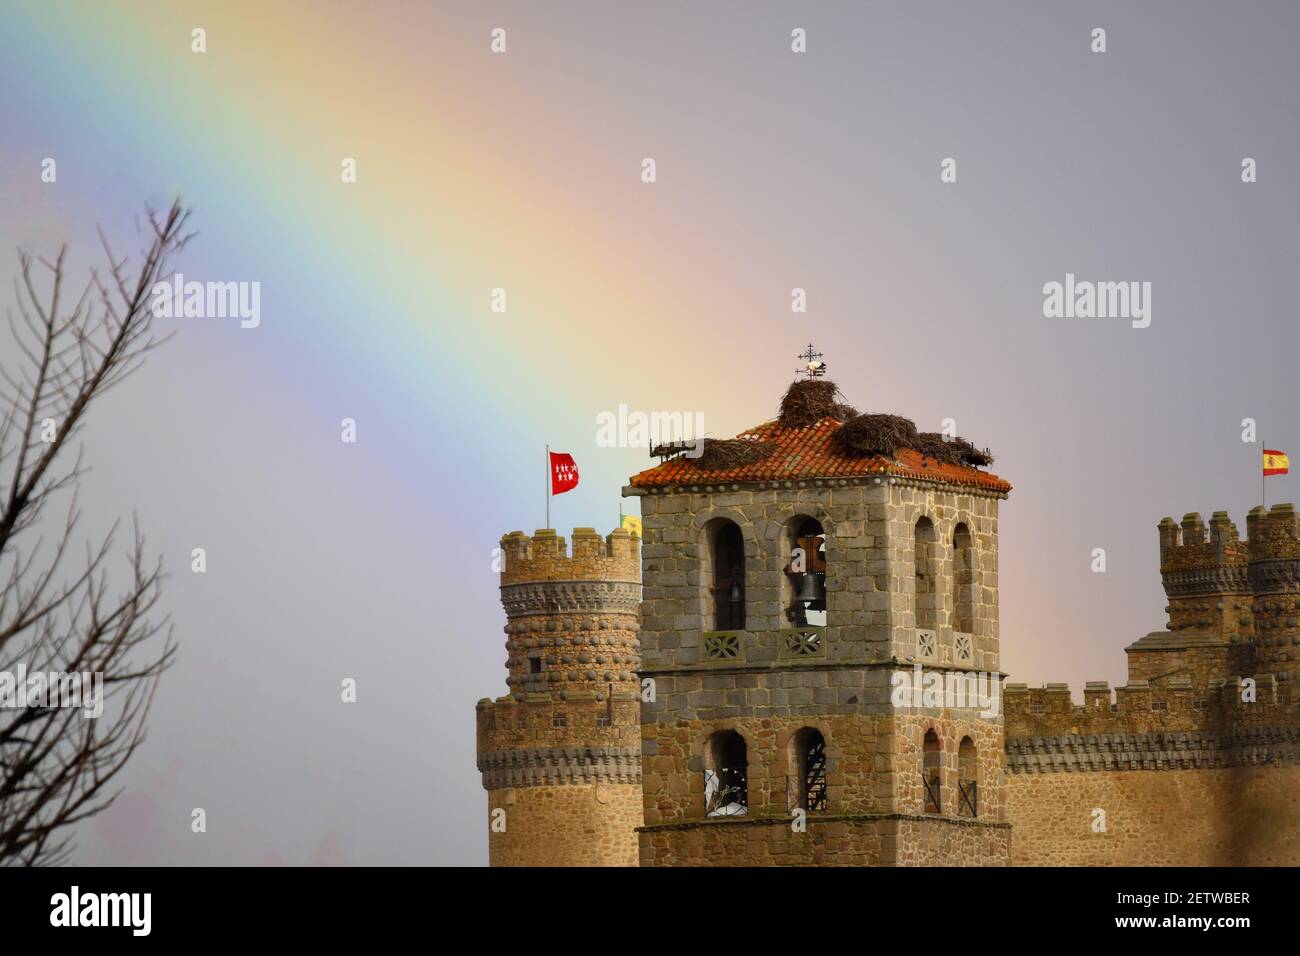 Rainbow over the castle. The rainbow is located on the tower of the castle of Manzanares El Real, in the Community of Madrid, Spain Stock Photo